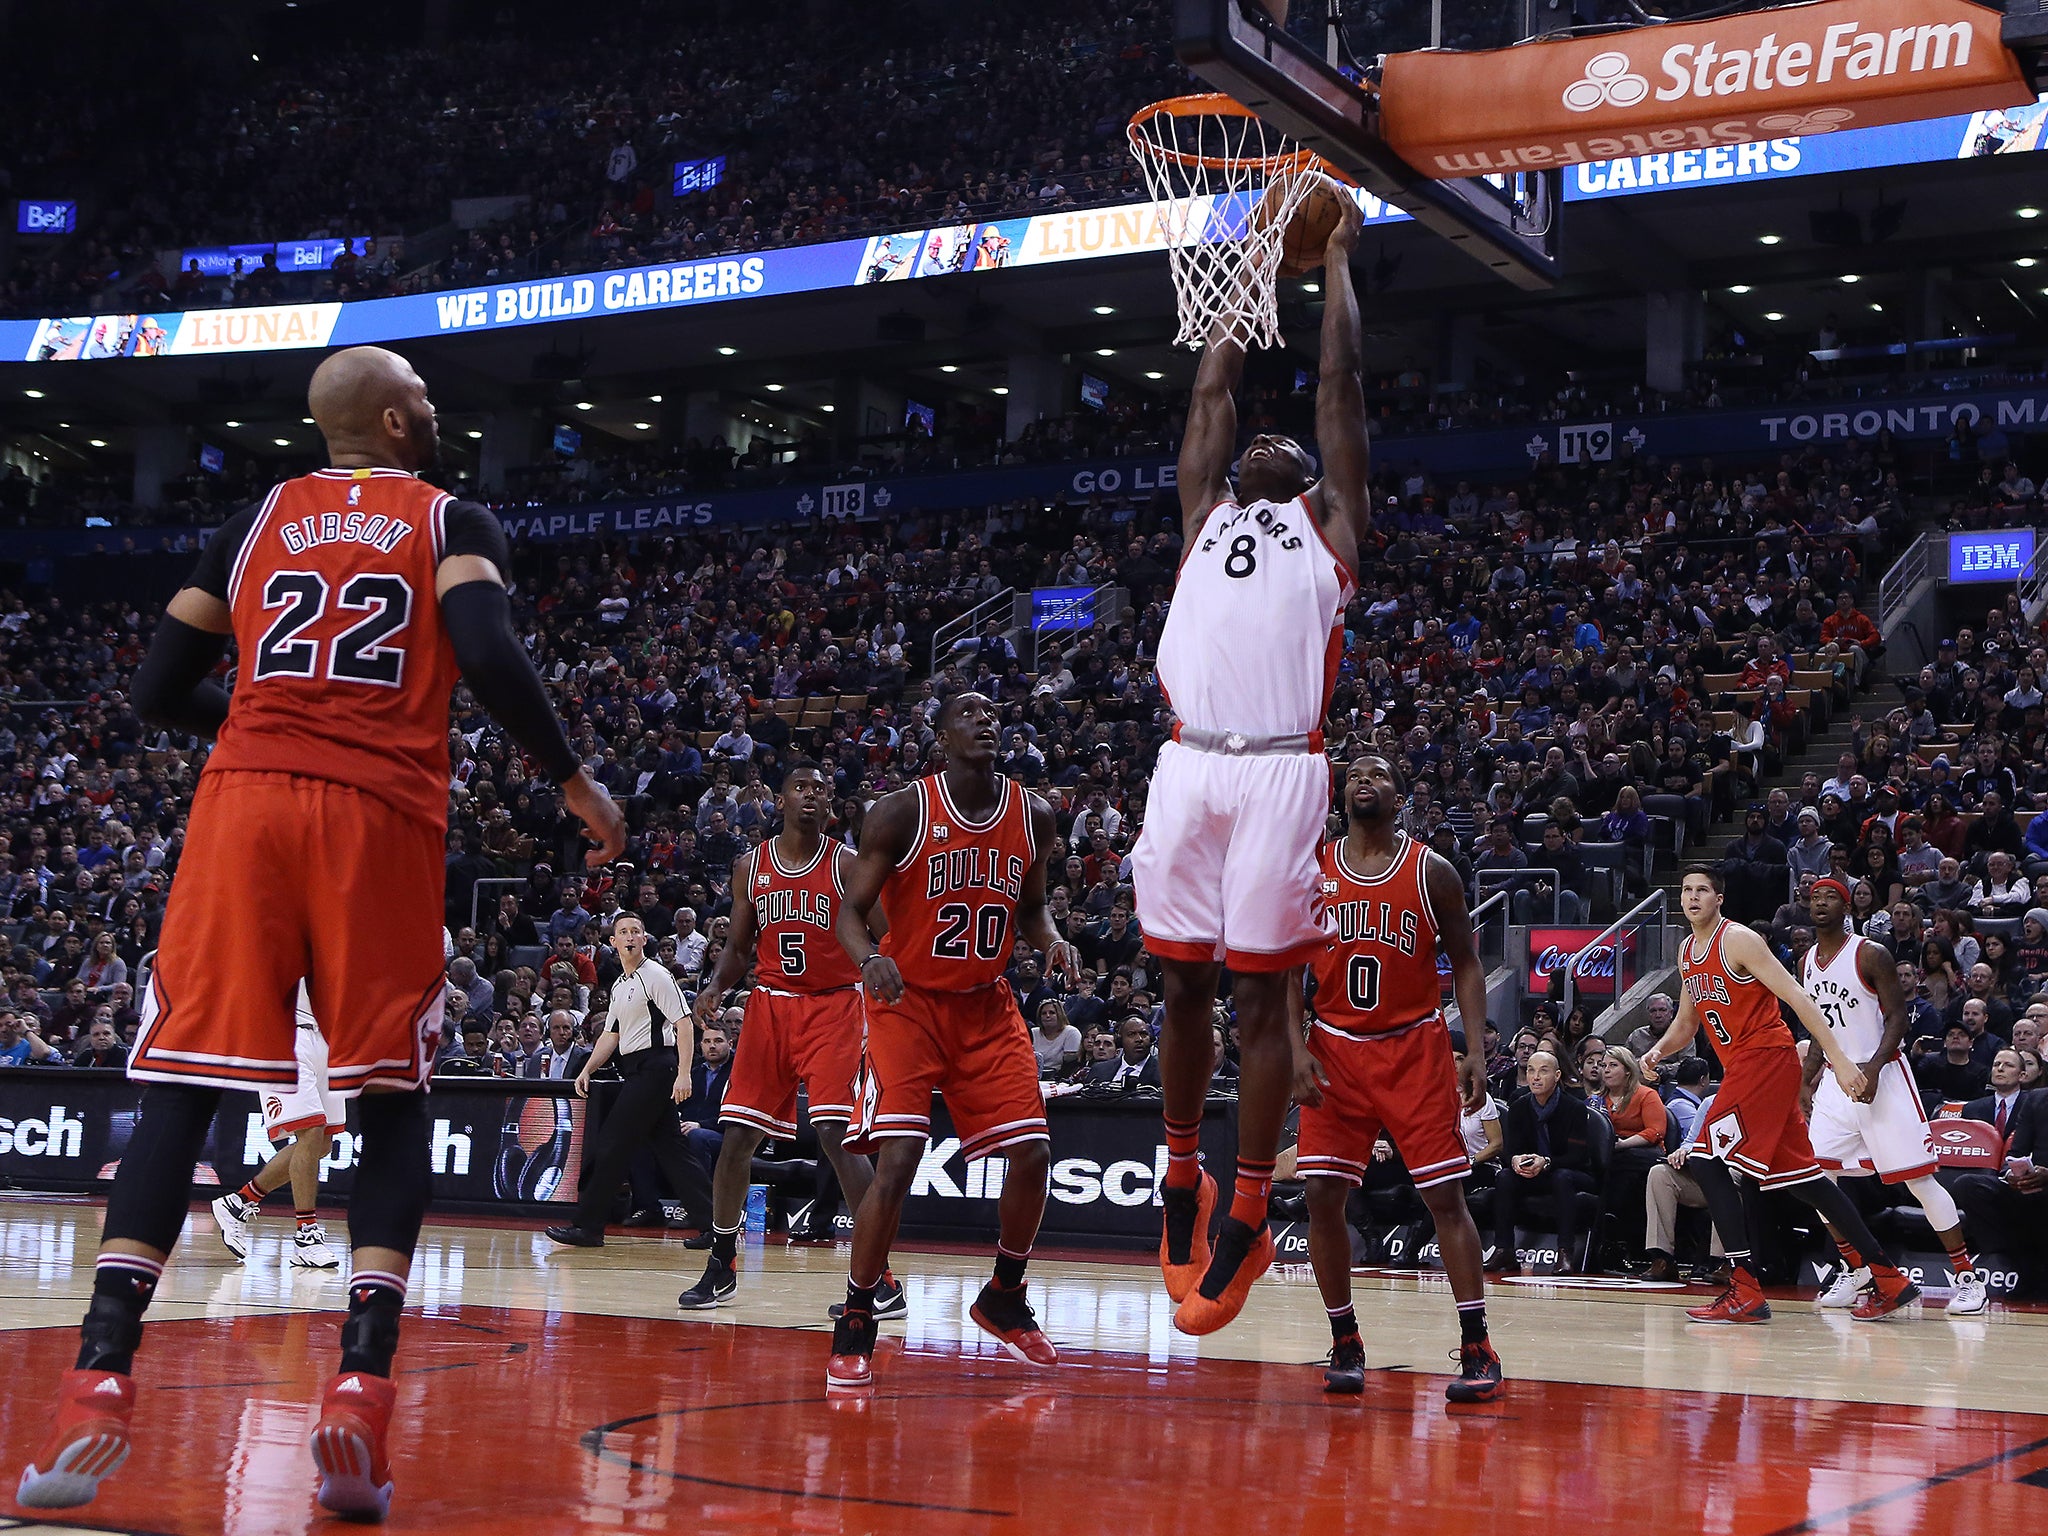 Biyombo throws down a dunk against the Chicago Bulls